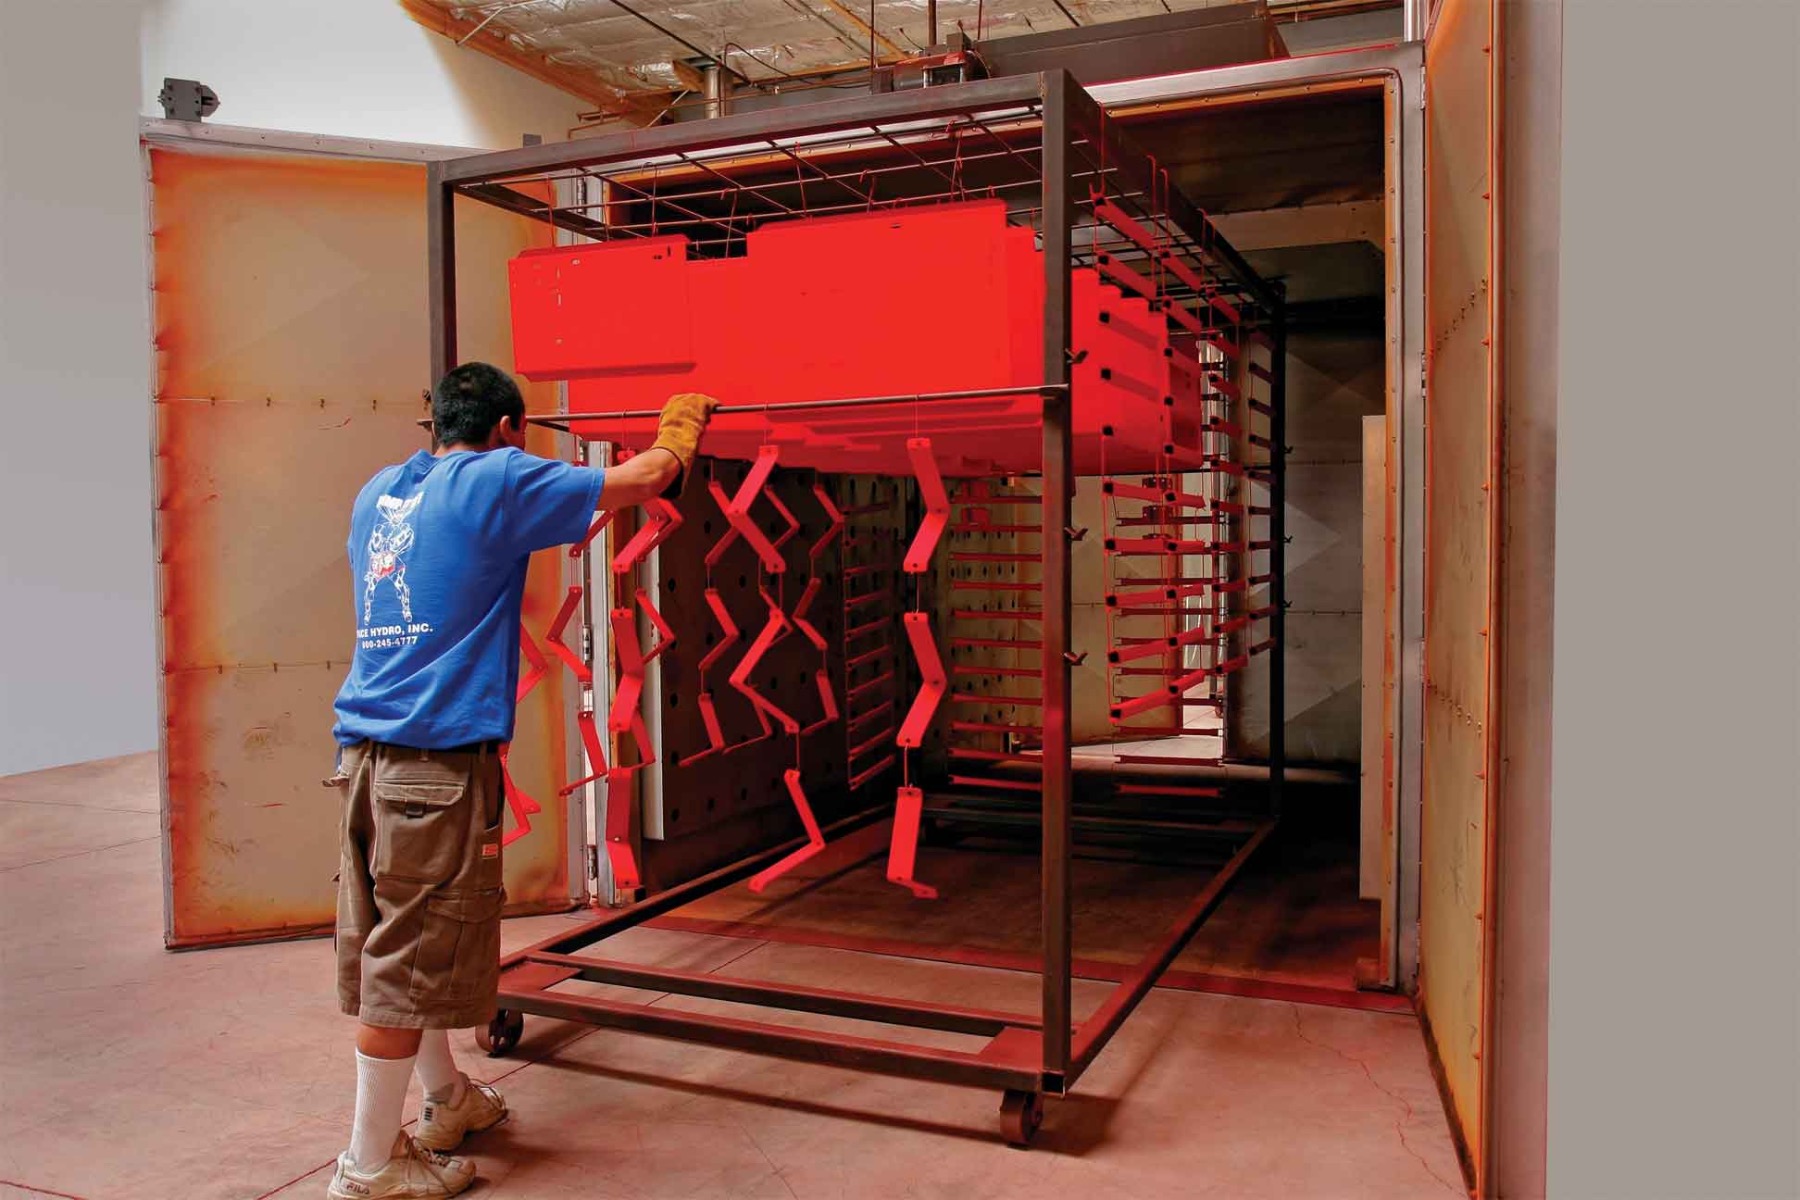 Products being powder coated in a powder coating oven